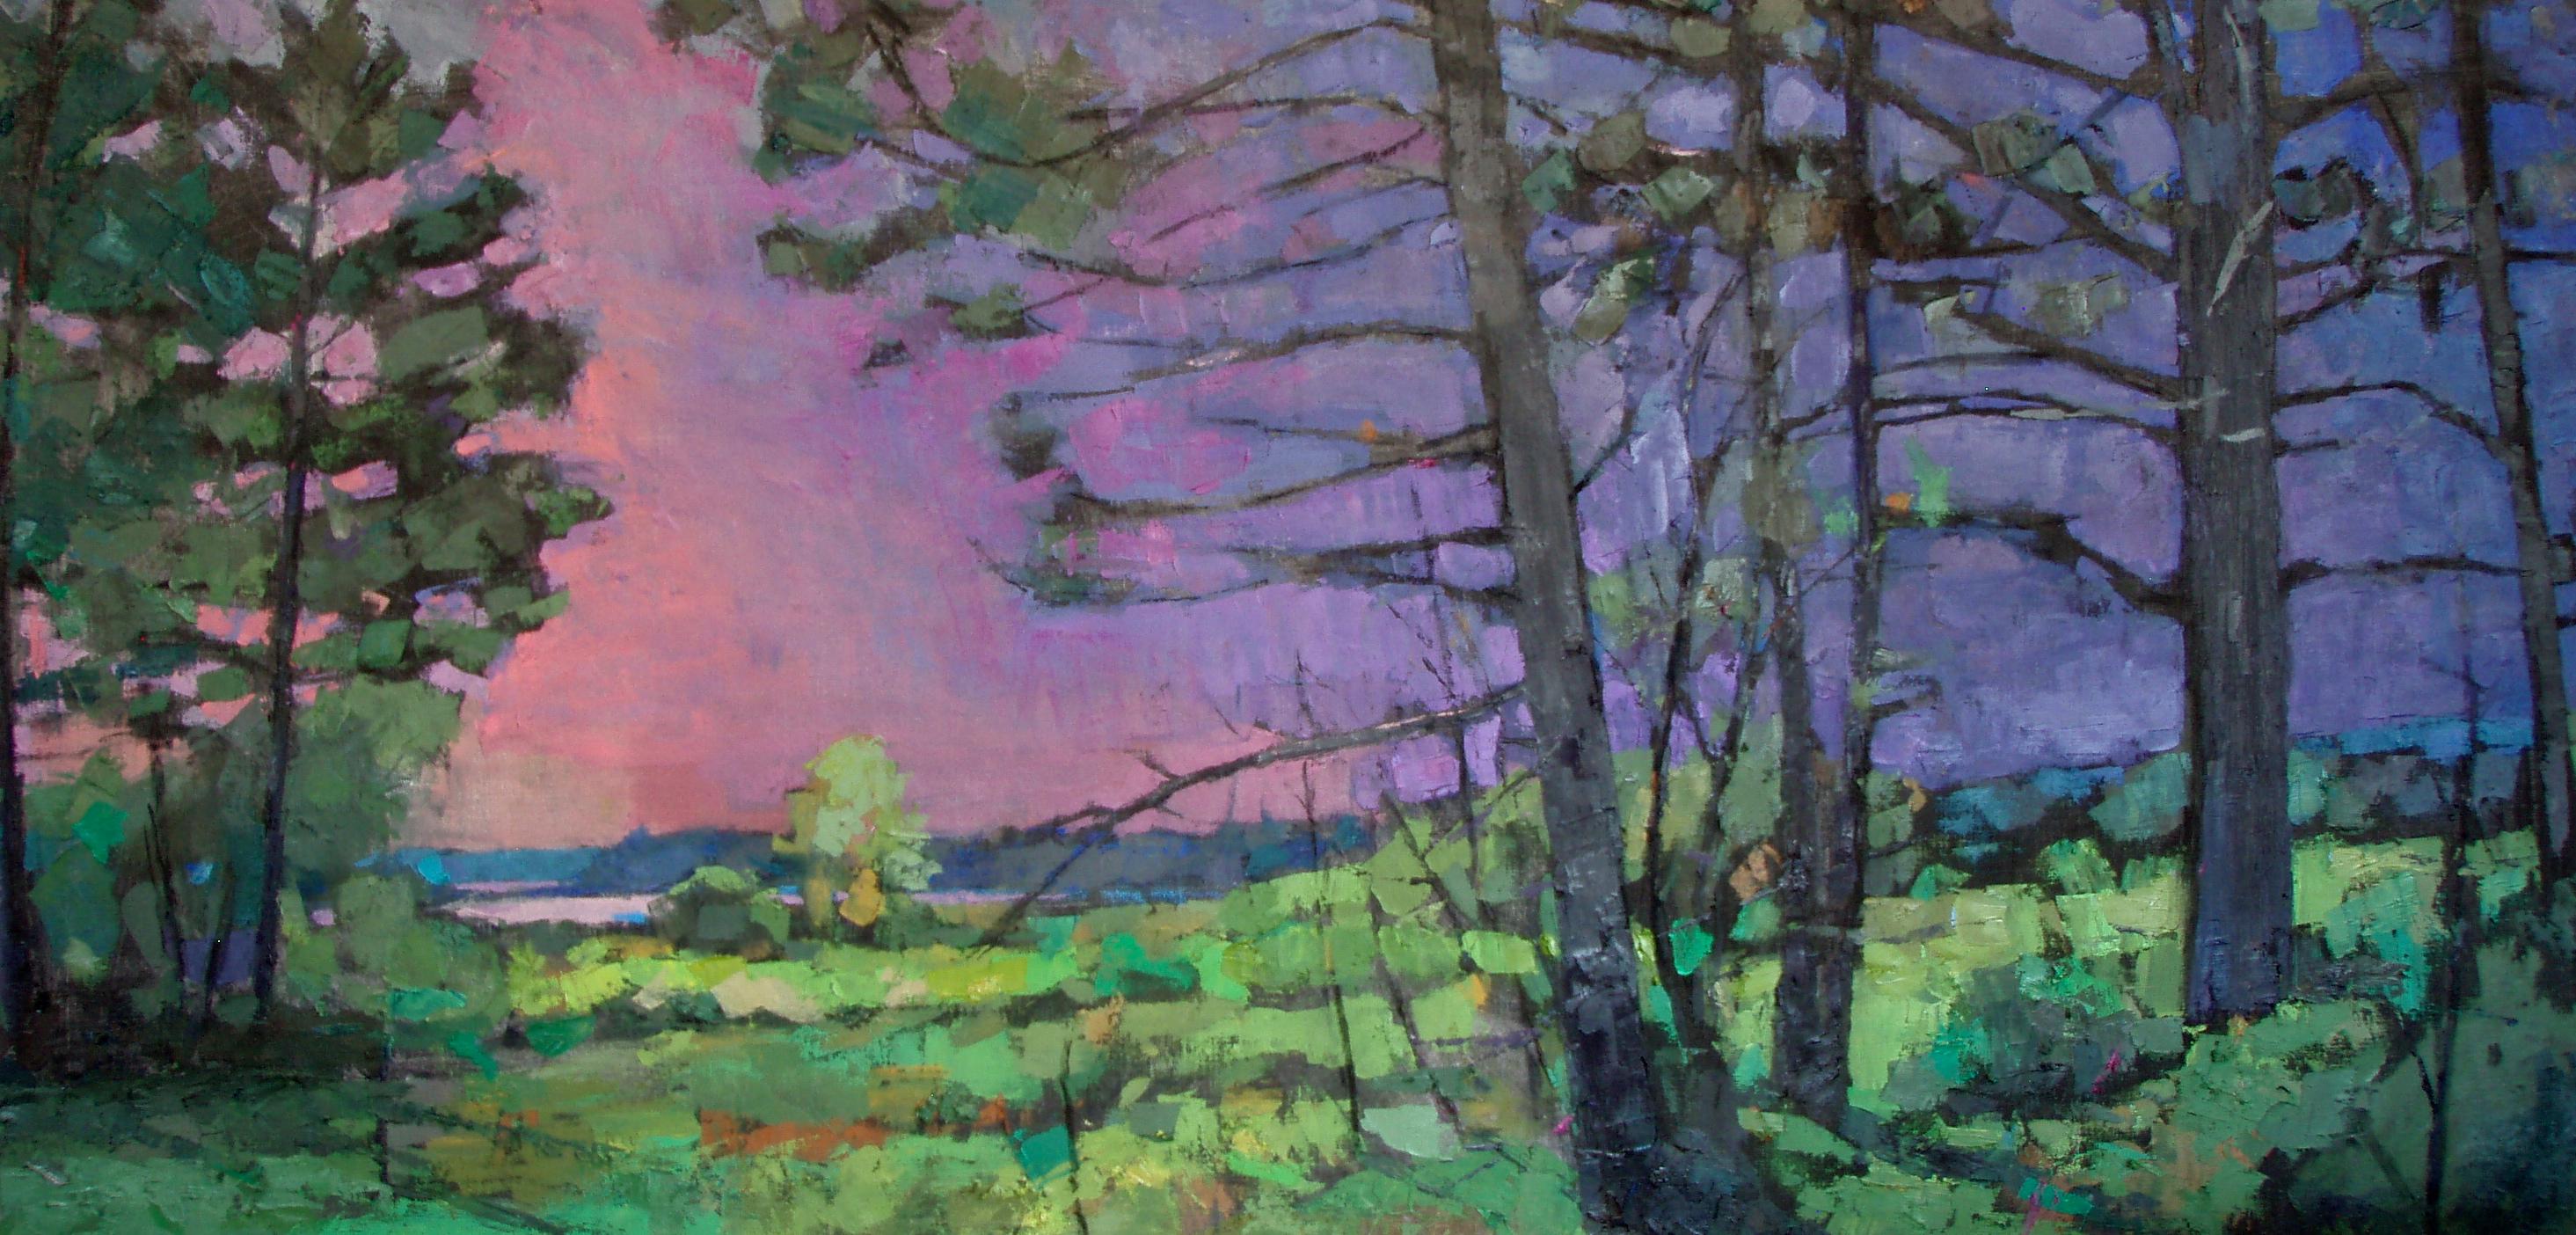 Larry Horowitz Landscape Painting - "Moose Habitat II" Oil painting through the woods, water & pink sky in distance